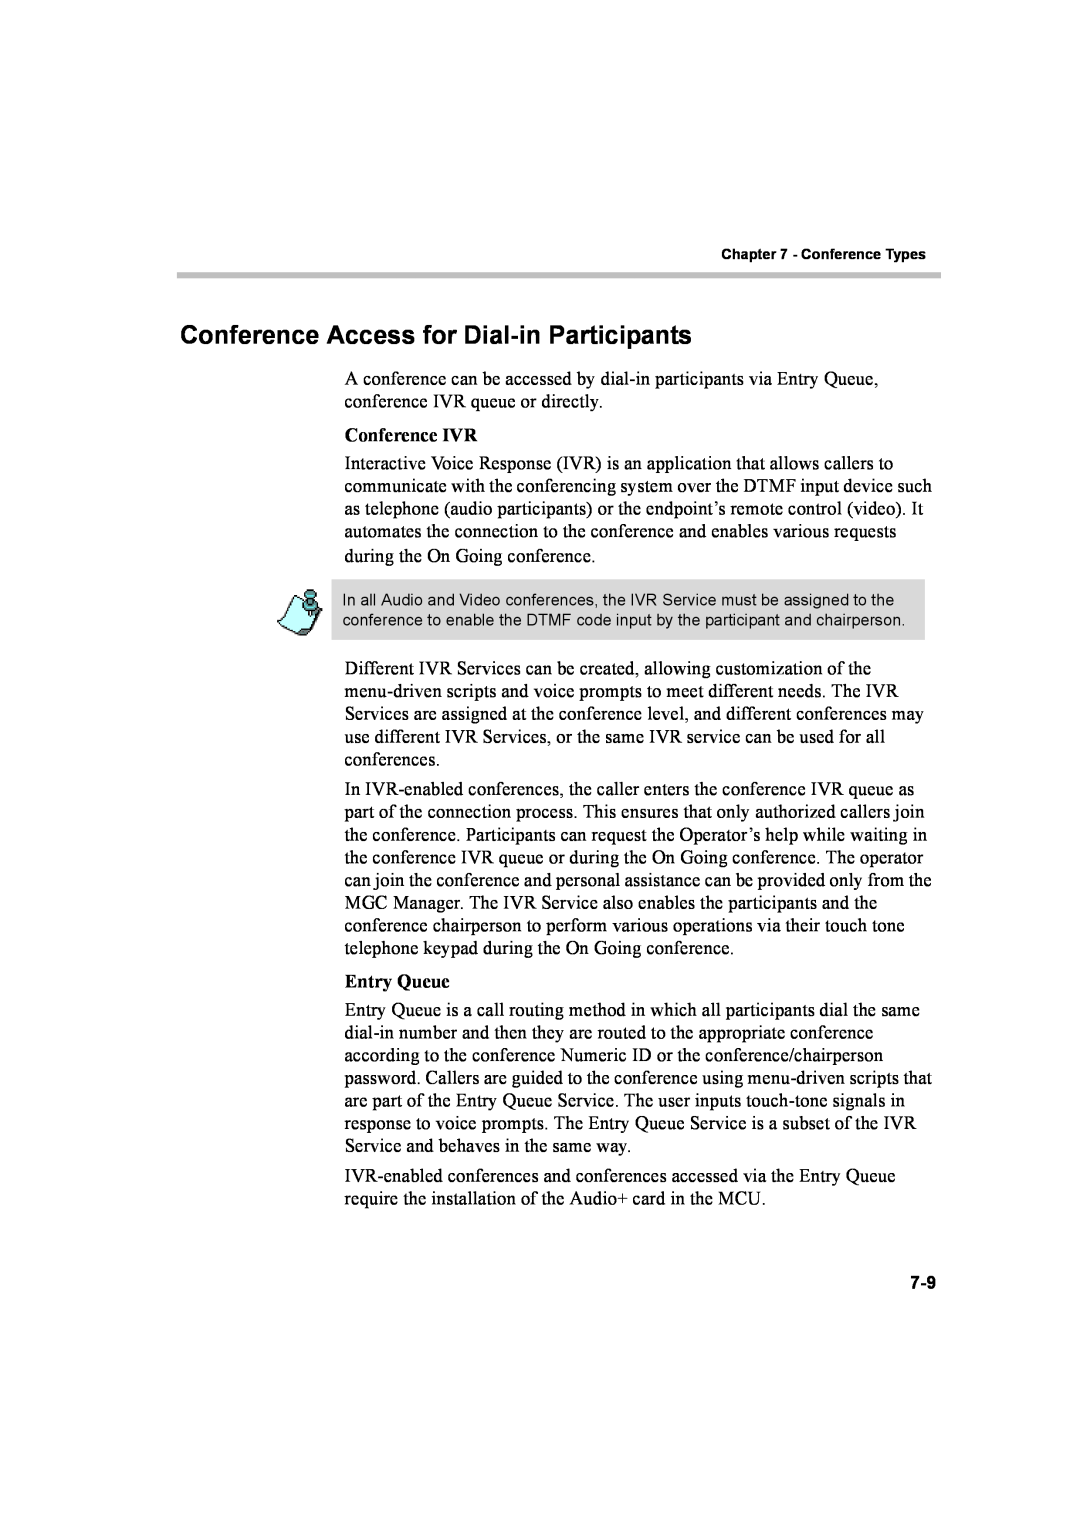 Polycom 8 manual Conference Access for Dial-inParticipants, Conference IVR, Entry Queue 